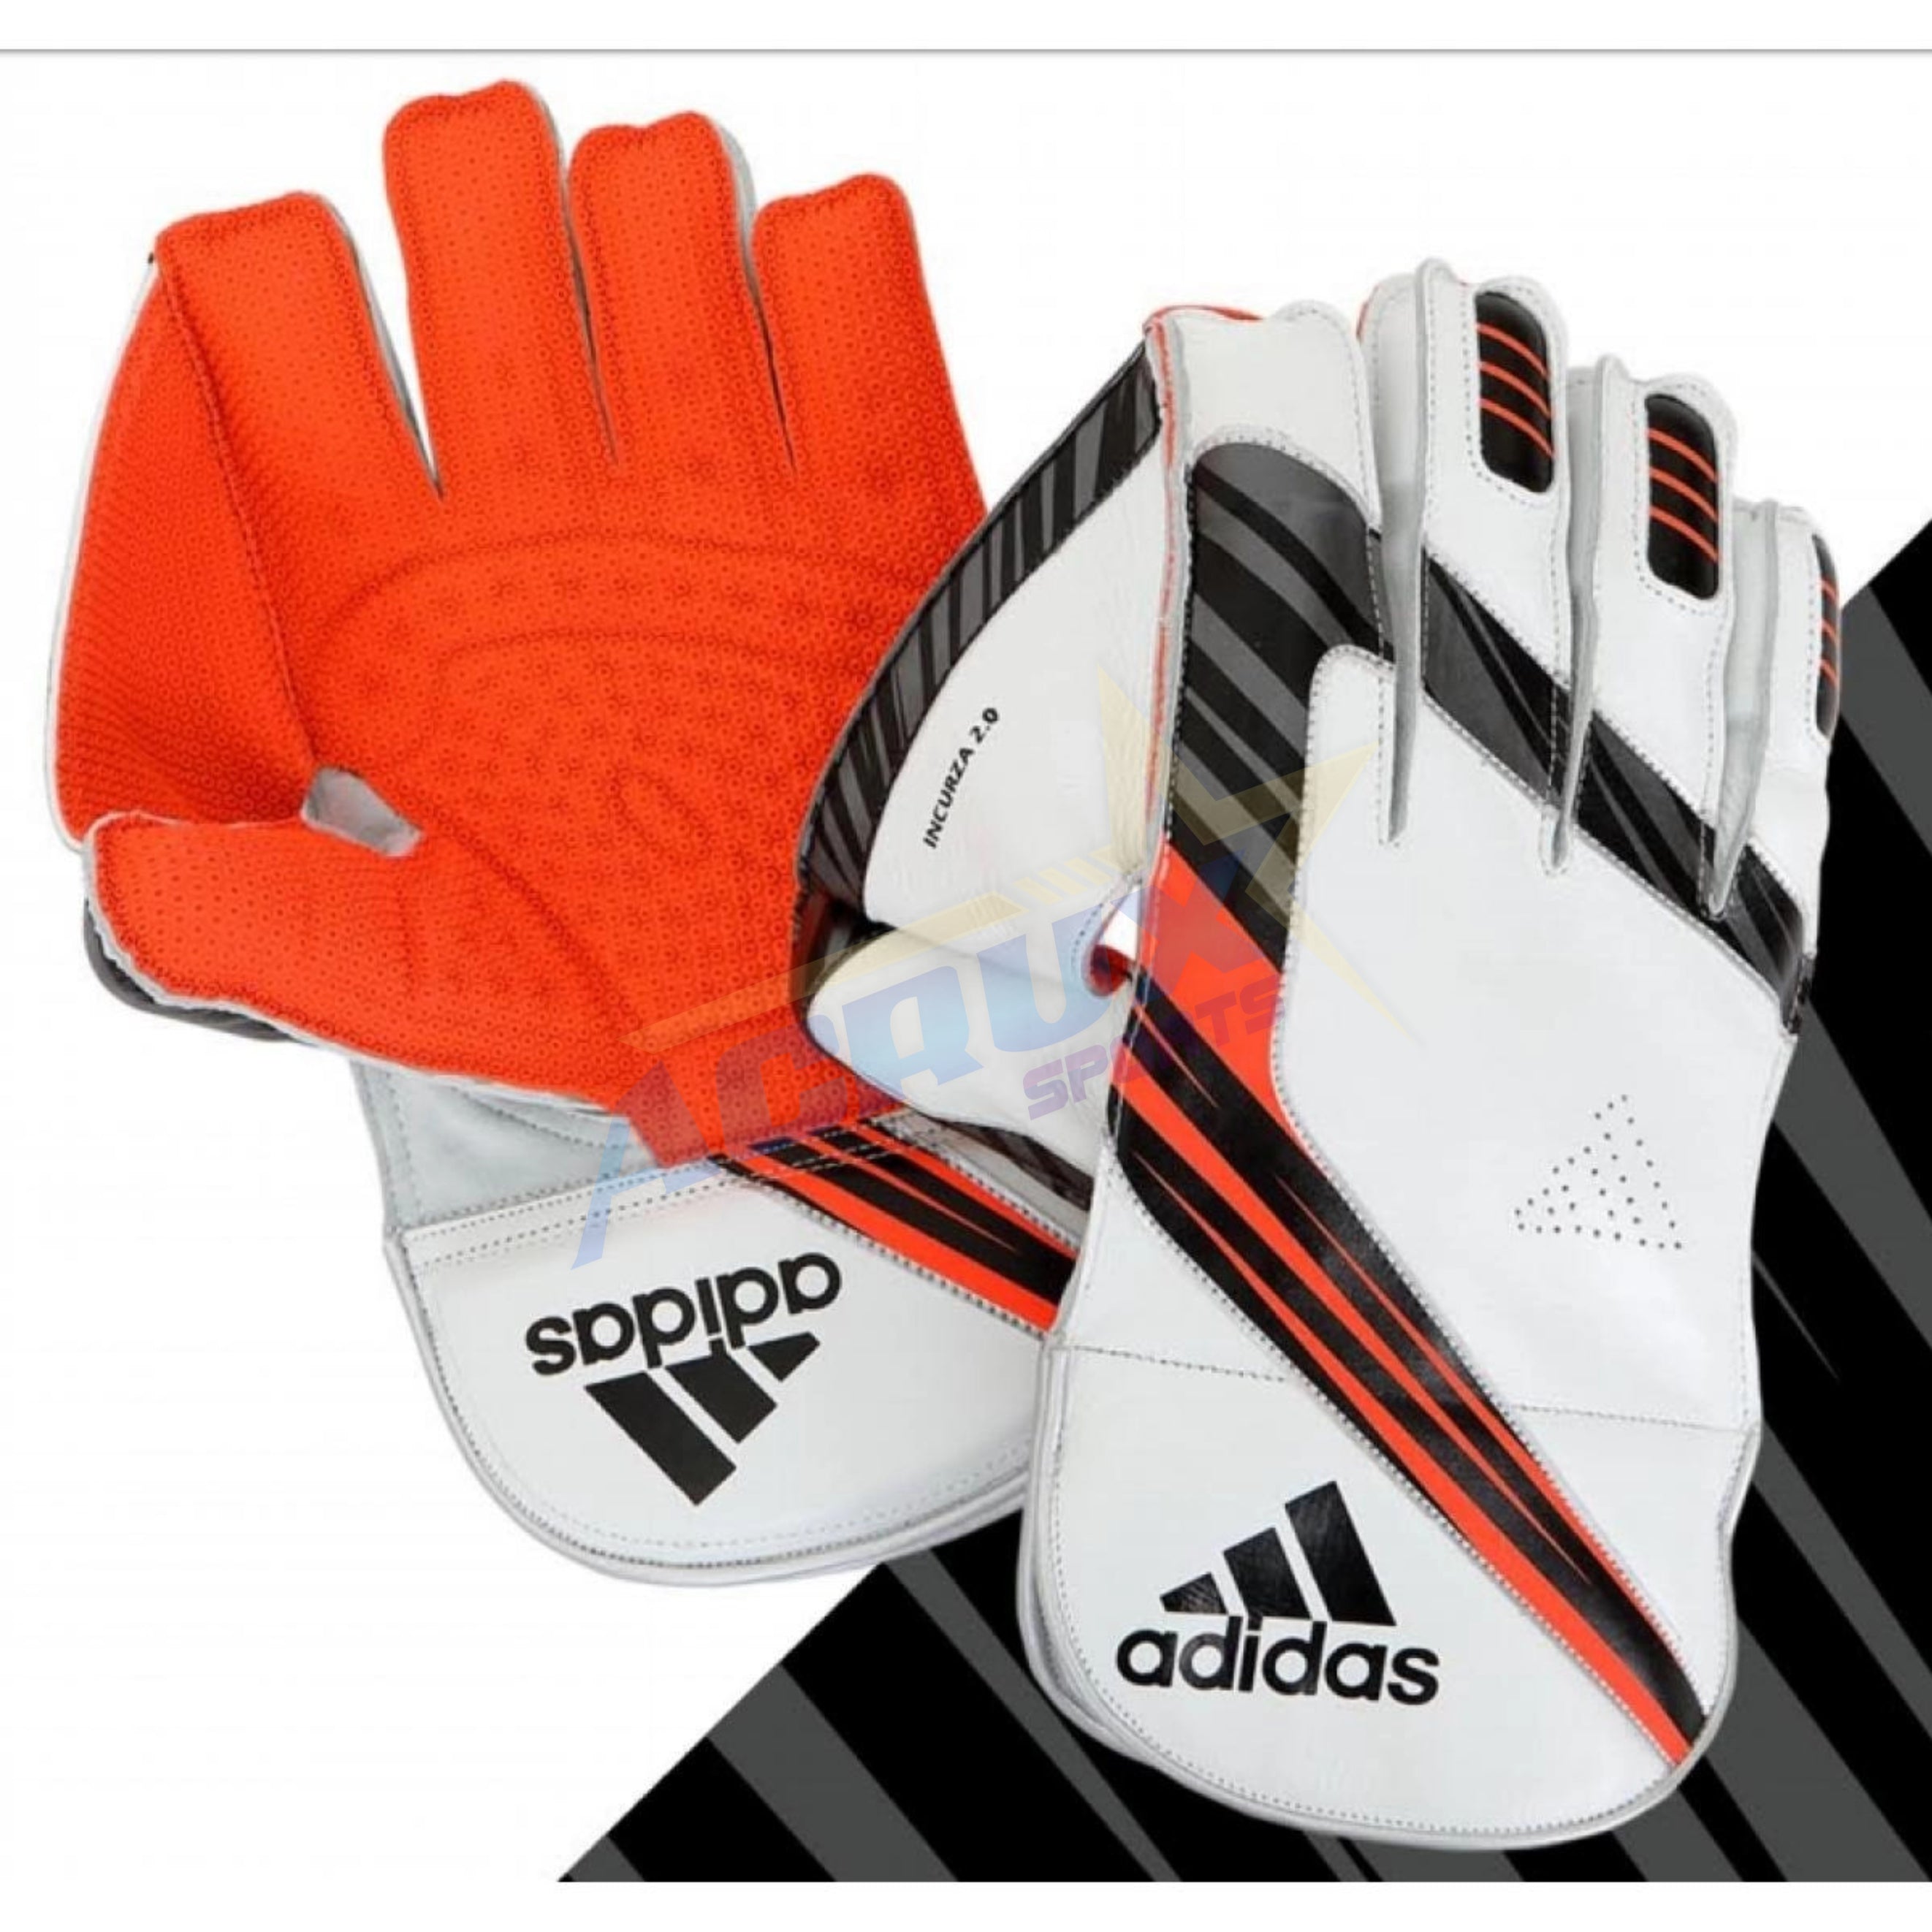 Adidas Incurza 2.0 Cricket Wicket Keeping Gloves.